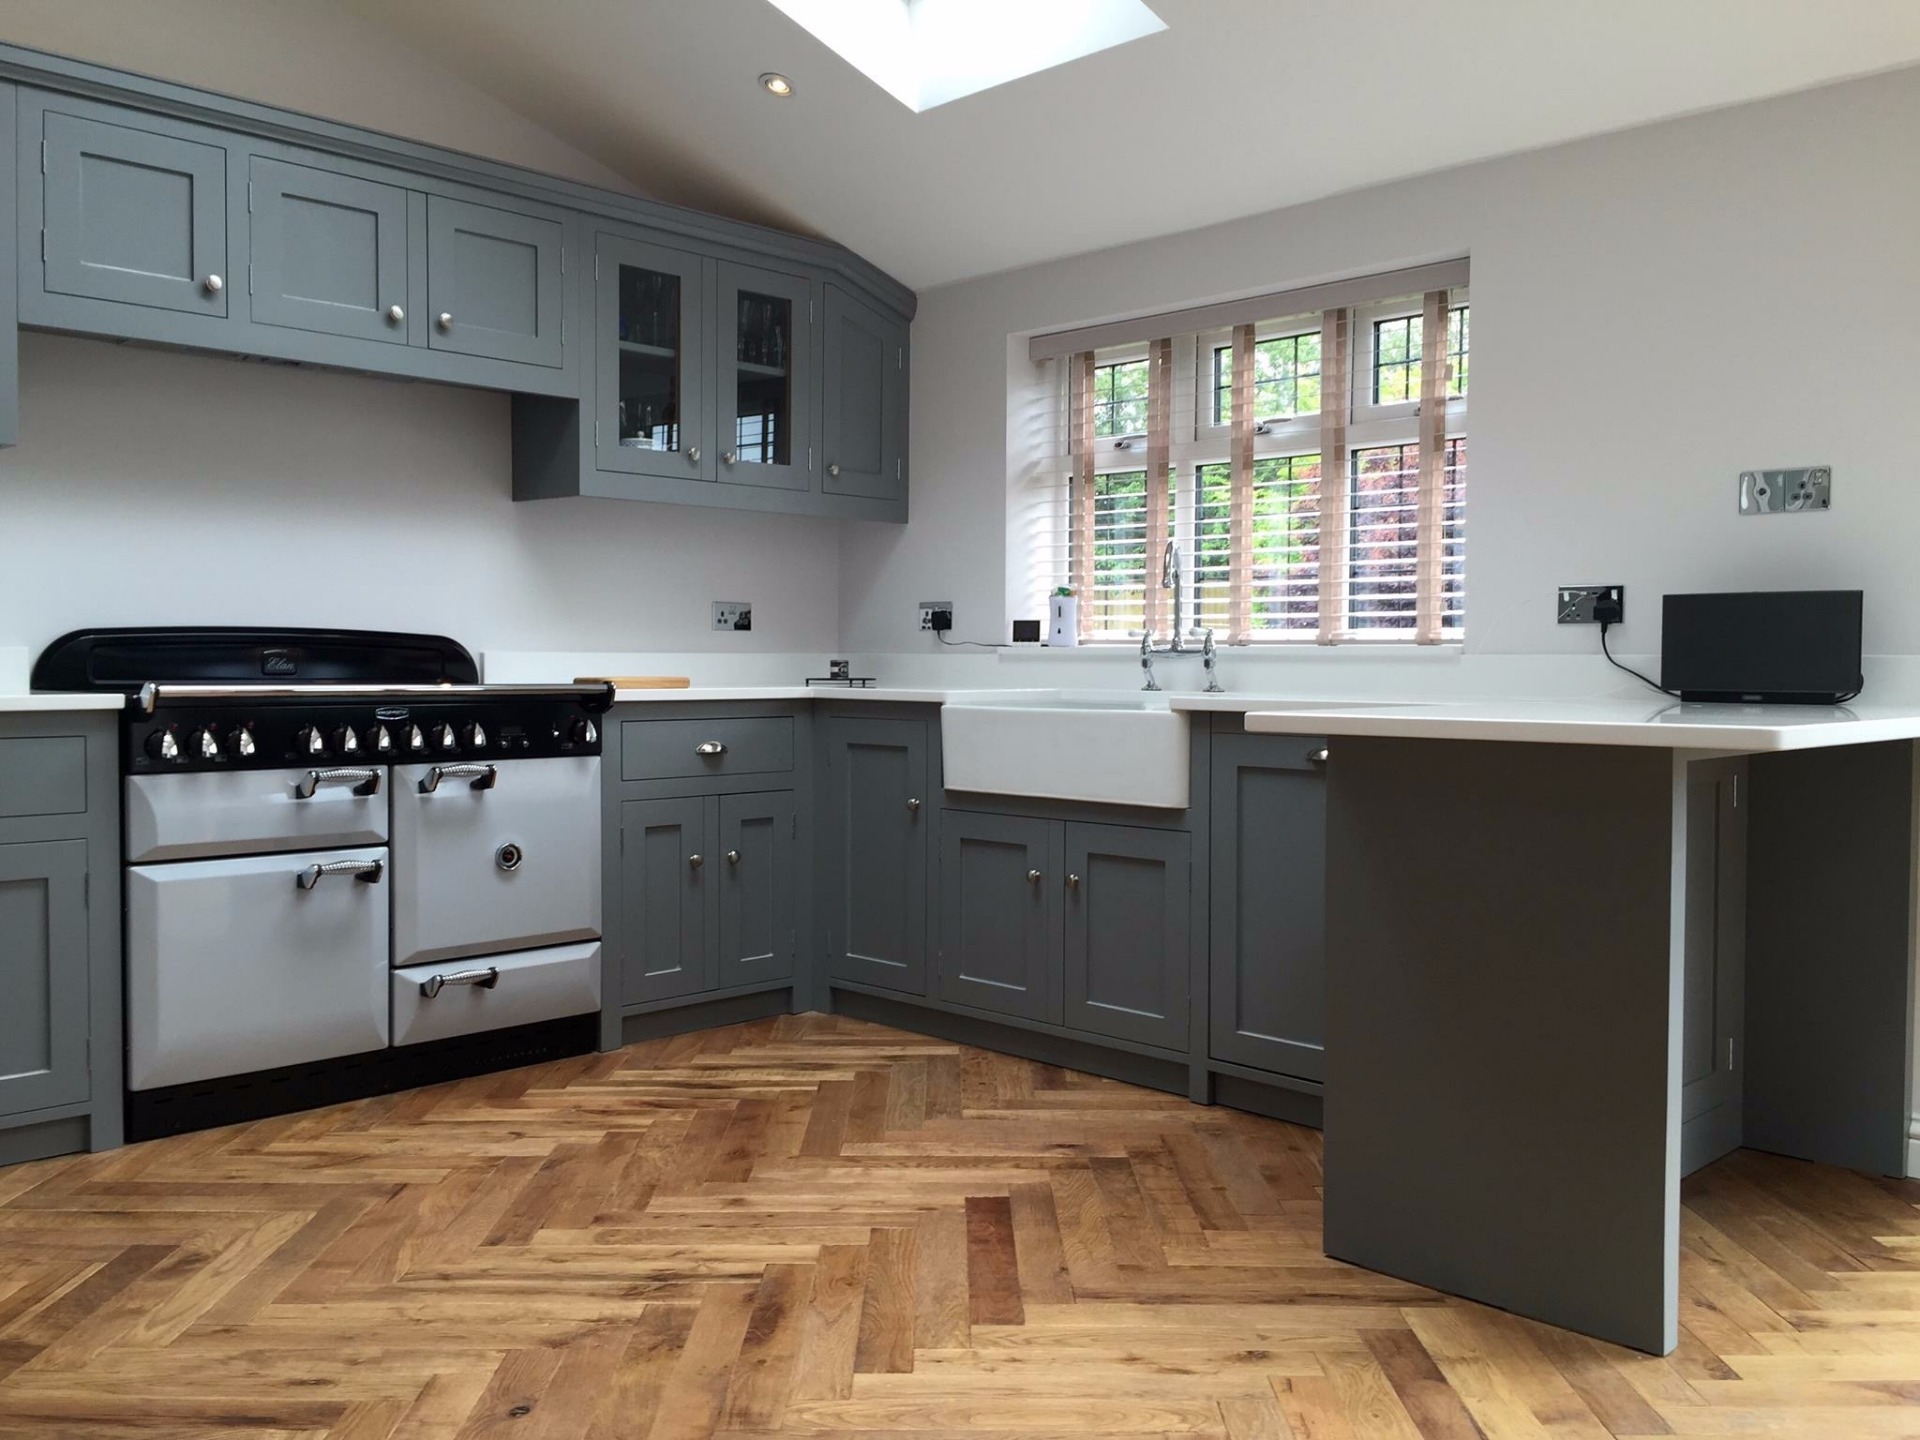 Fully bespoke shaker style fitted kitchen hand made from solid wood in shaker style with belfast sink painted in Farrow &Ball elephants breath.